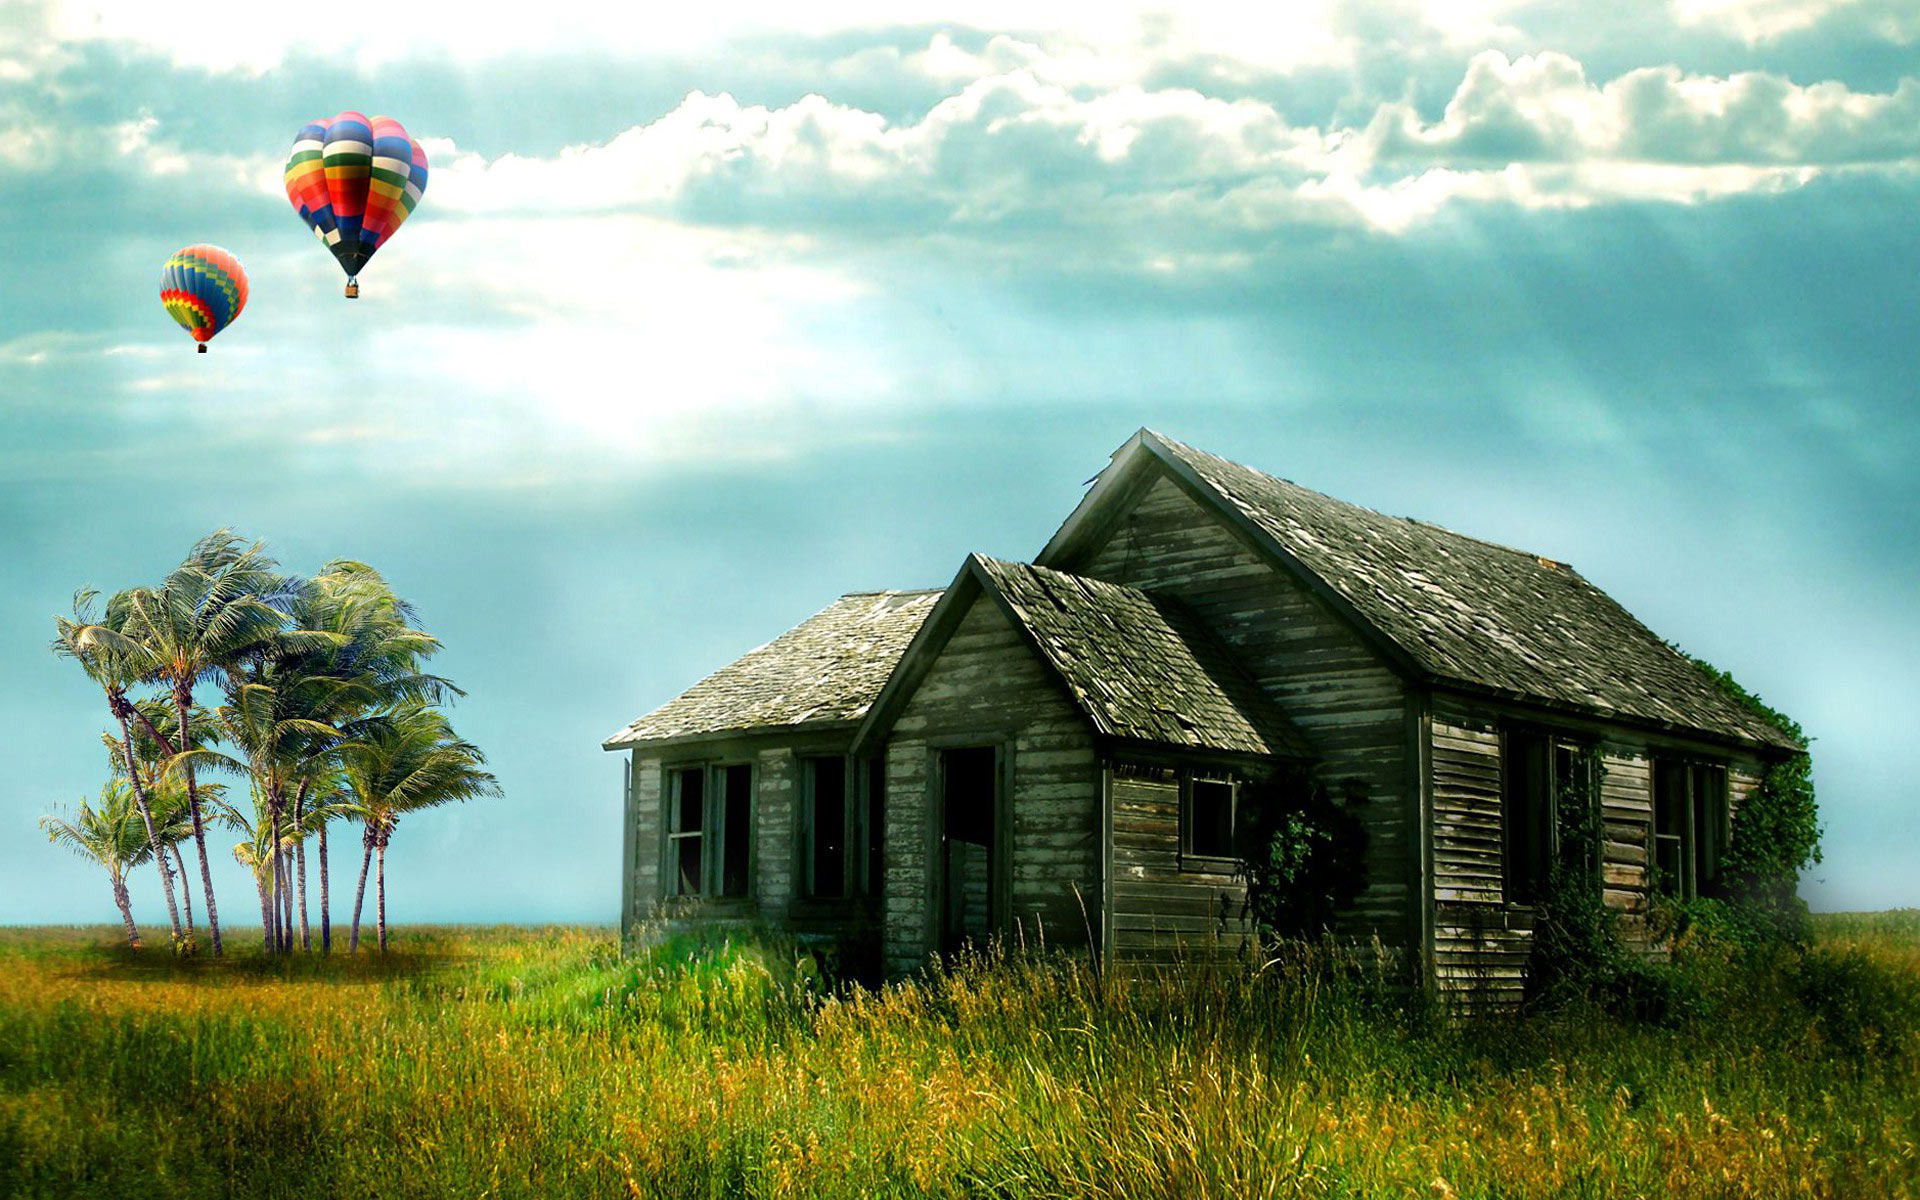 Old House And Balloons On The Field Wallpaper